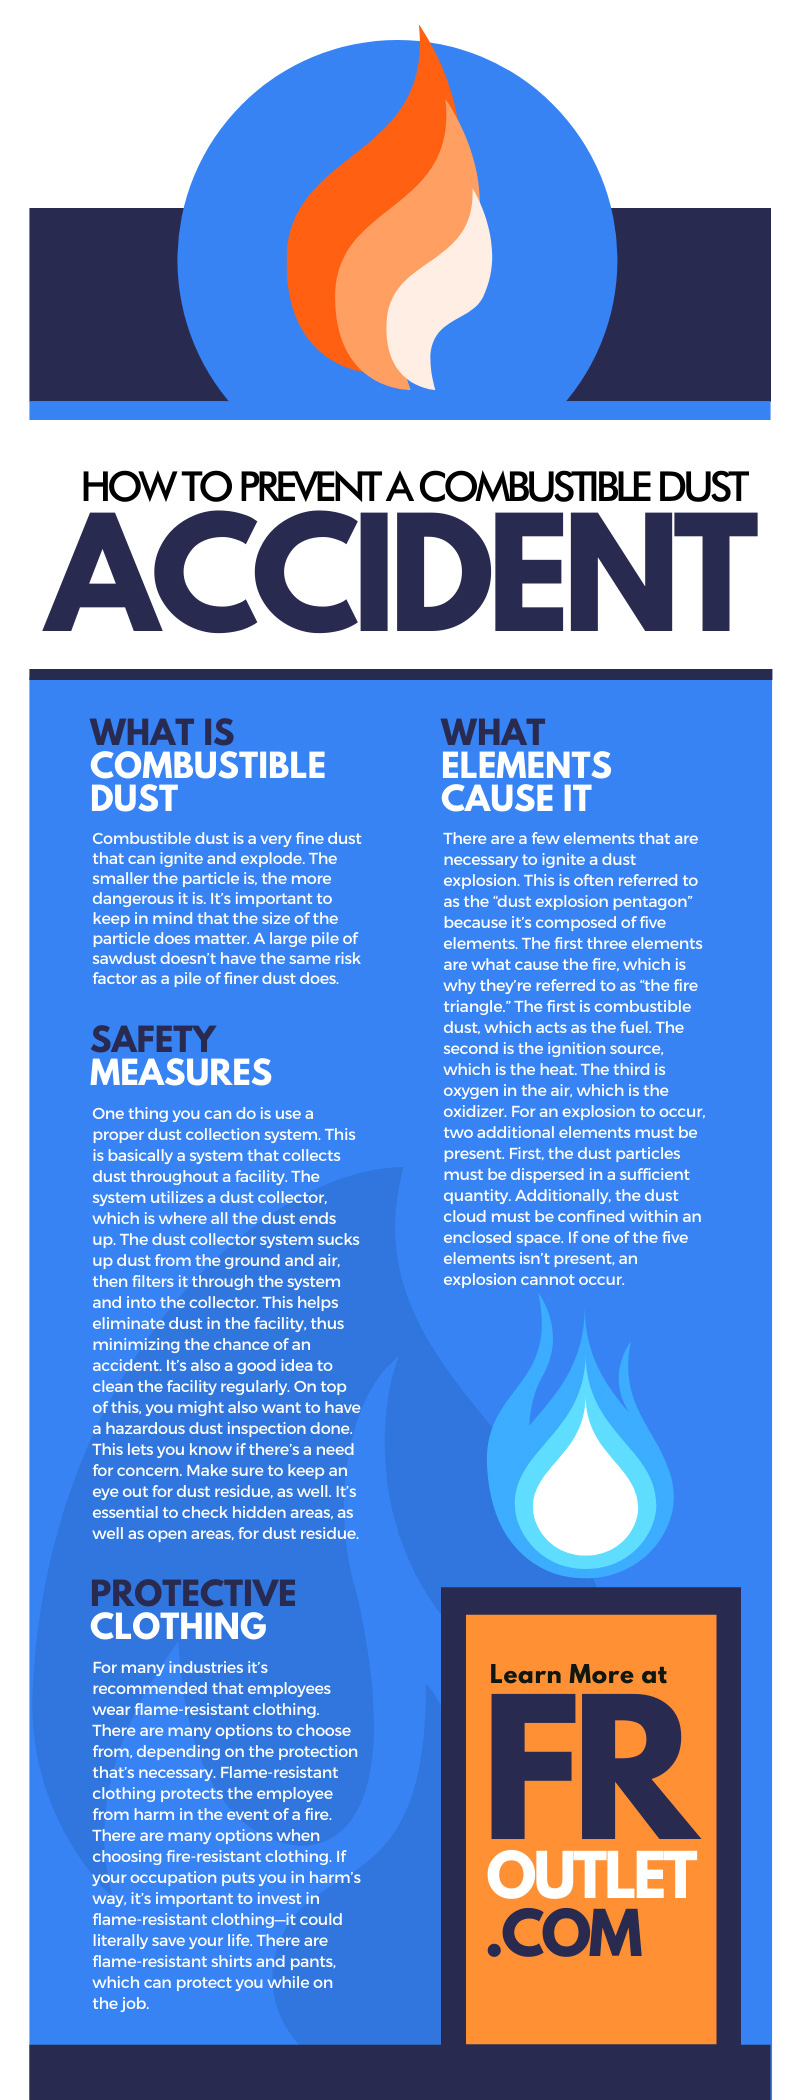 How To Prevent a Combustible Dust Accident